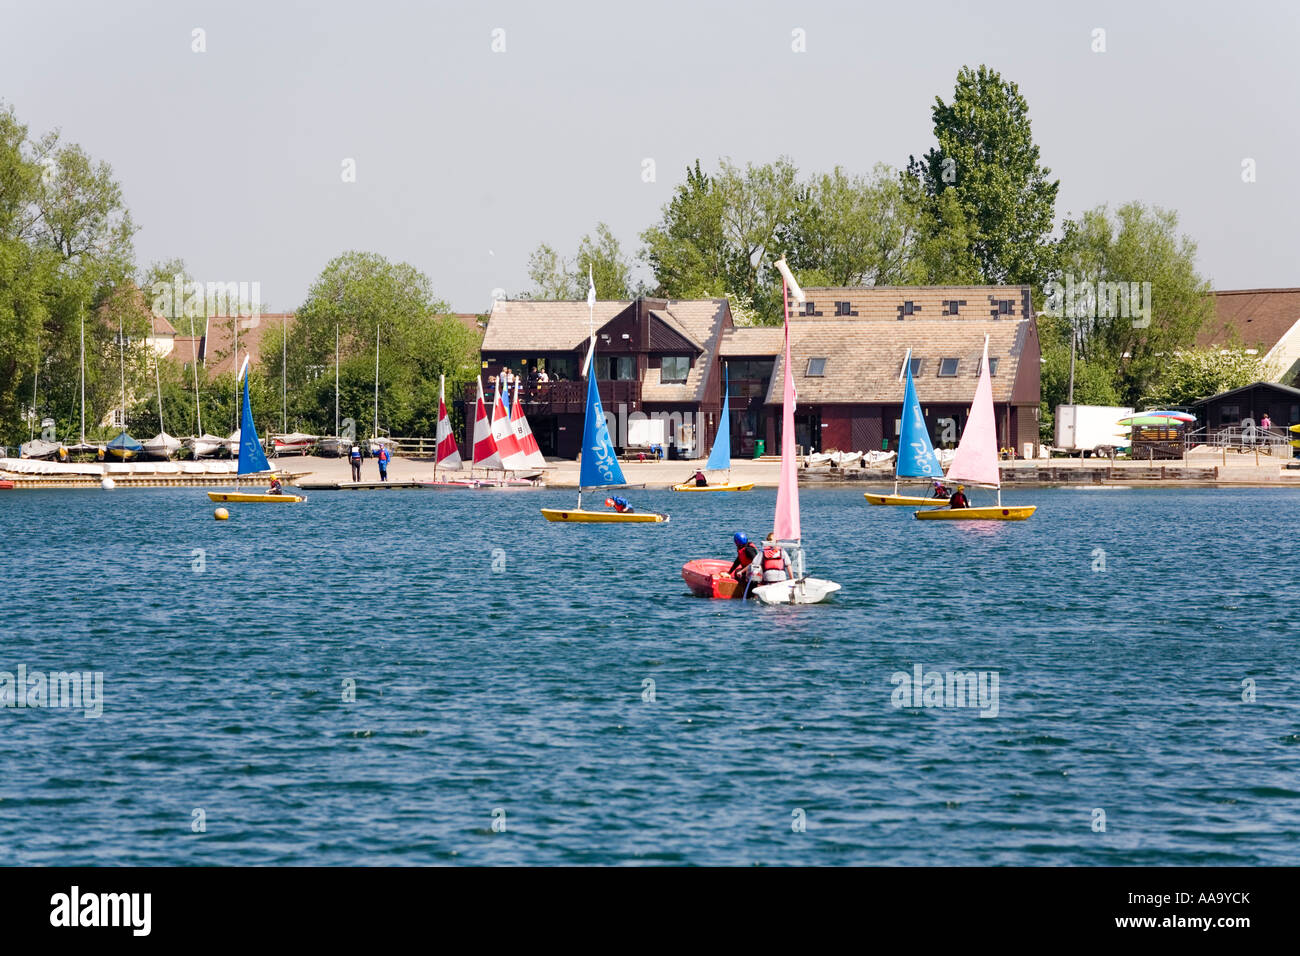 Sailing at the South Cerney Outdoor Education Centre, Lake 12, Cotswold Water Park, South Cerney, Gloucestershire UK Stock Photo